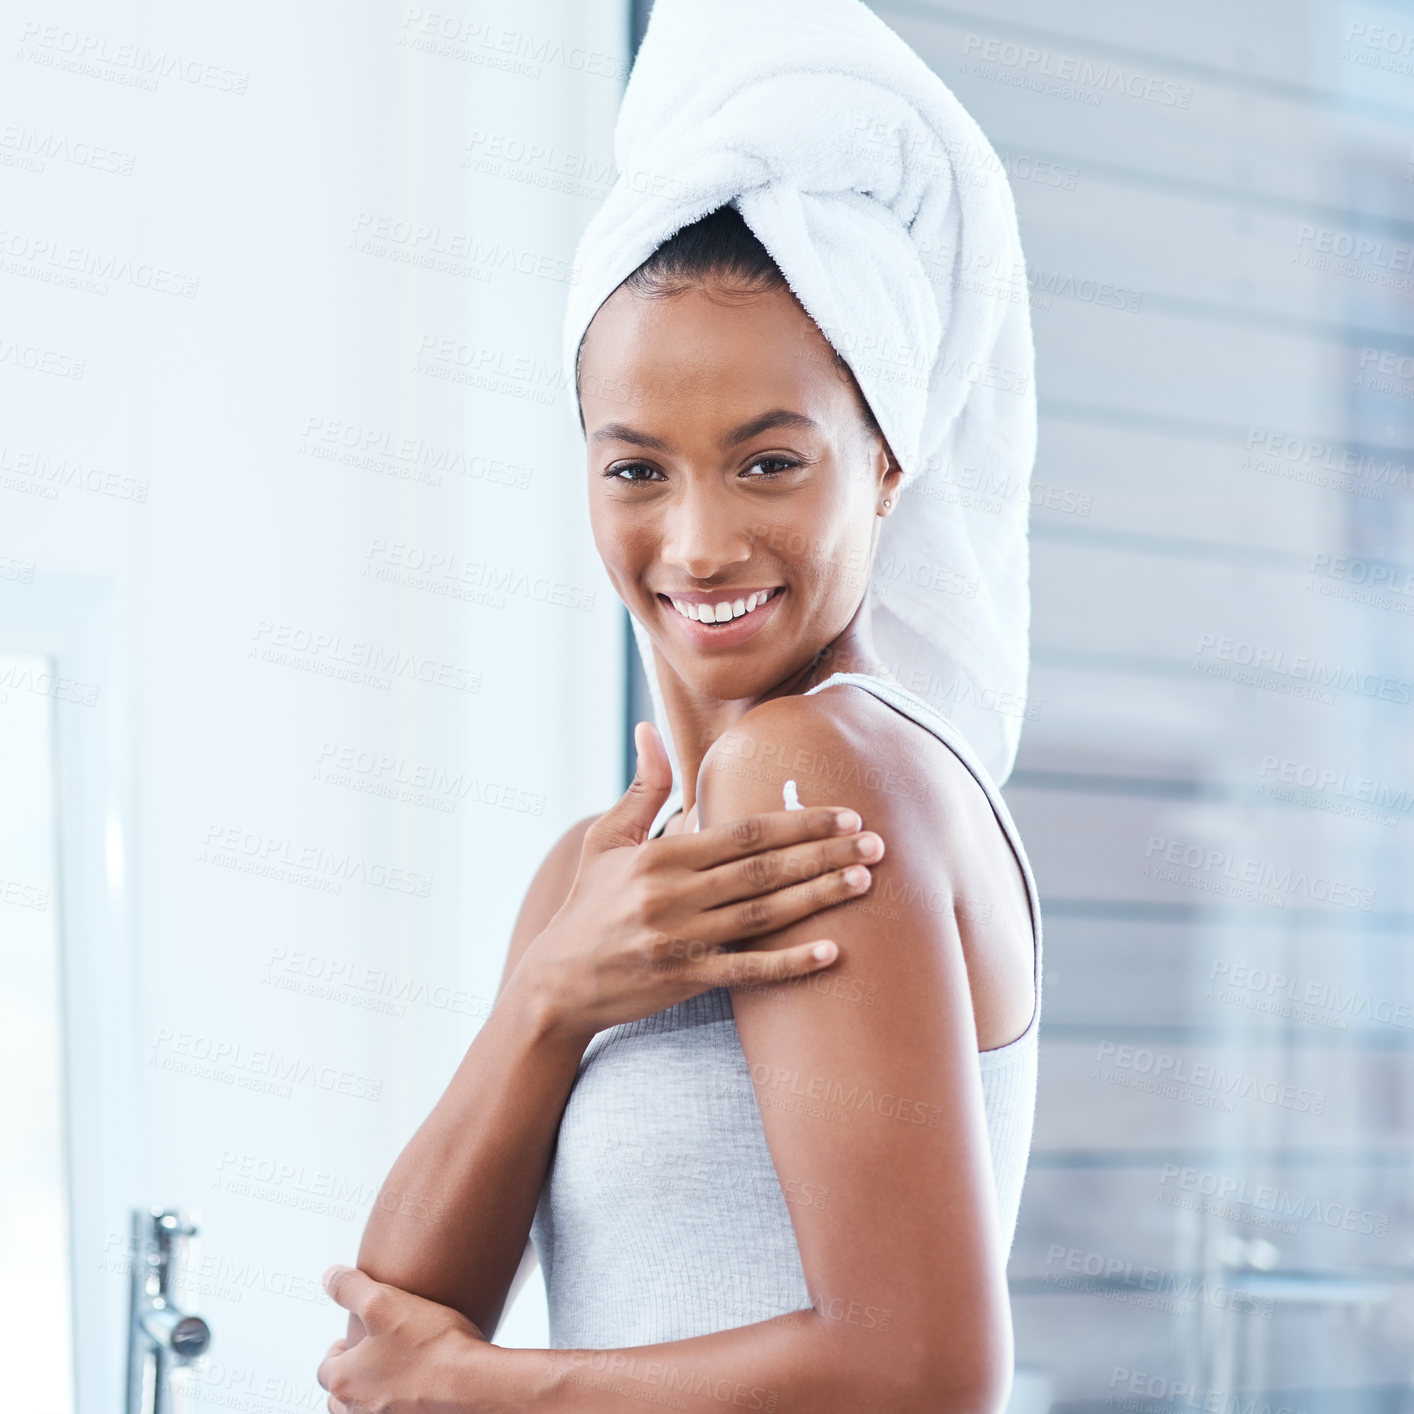 Buy stock photo Shot of a young woman applying moisturizer to her body